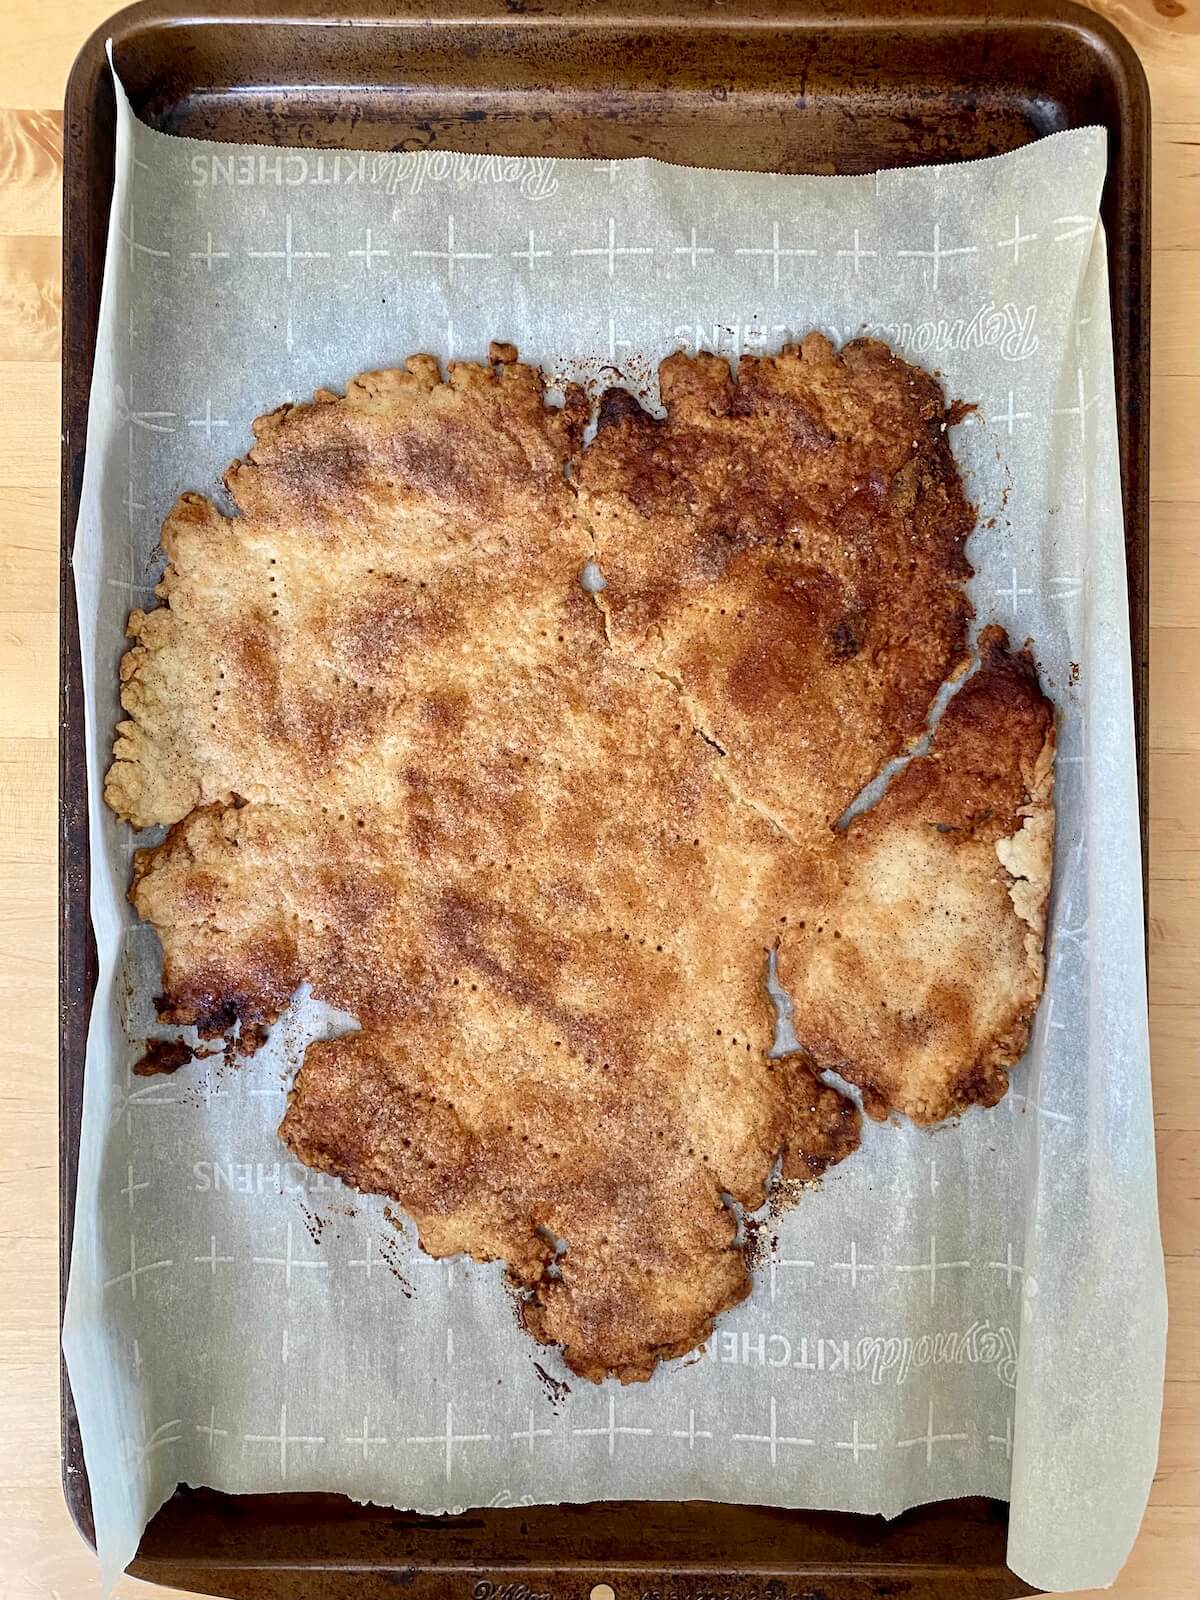 A cinnamon-sugar pie crust baked to golden brown perfection on a baking sheet.